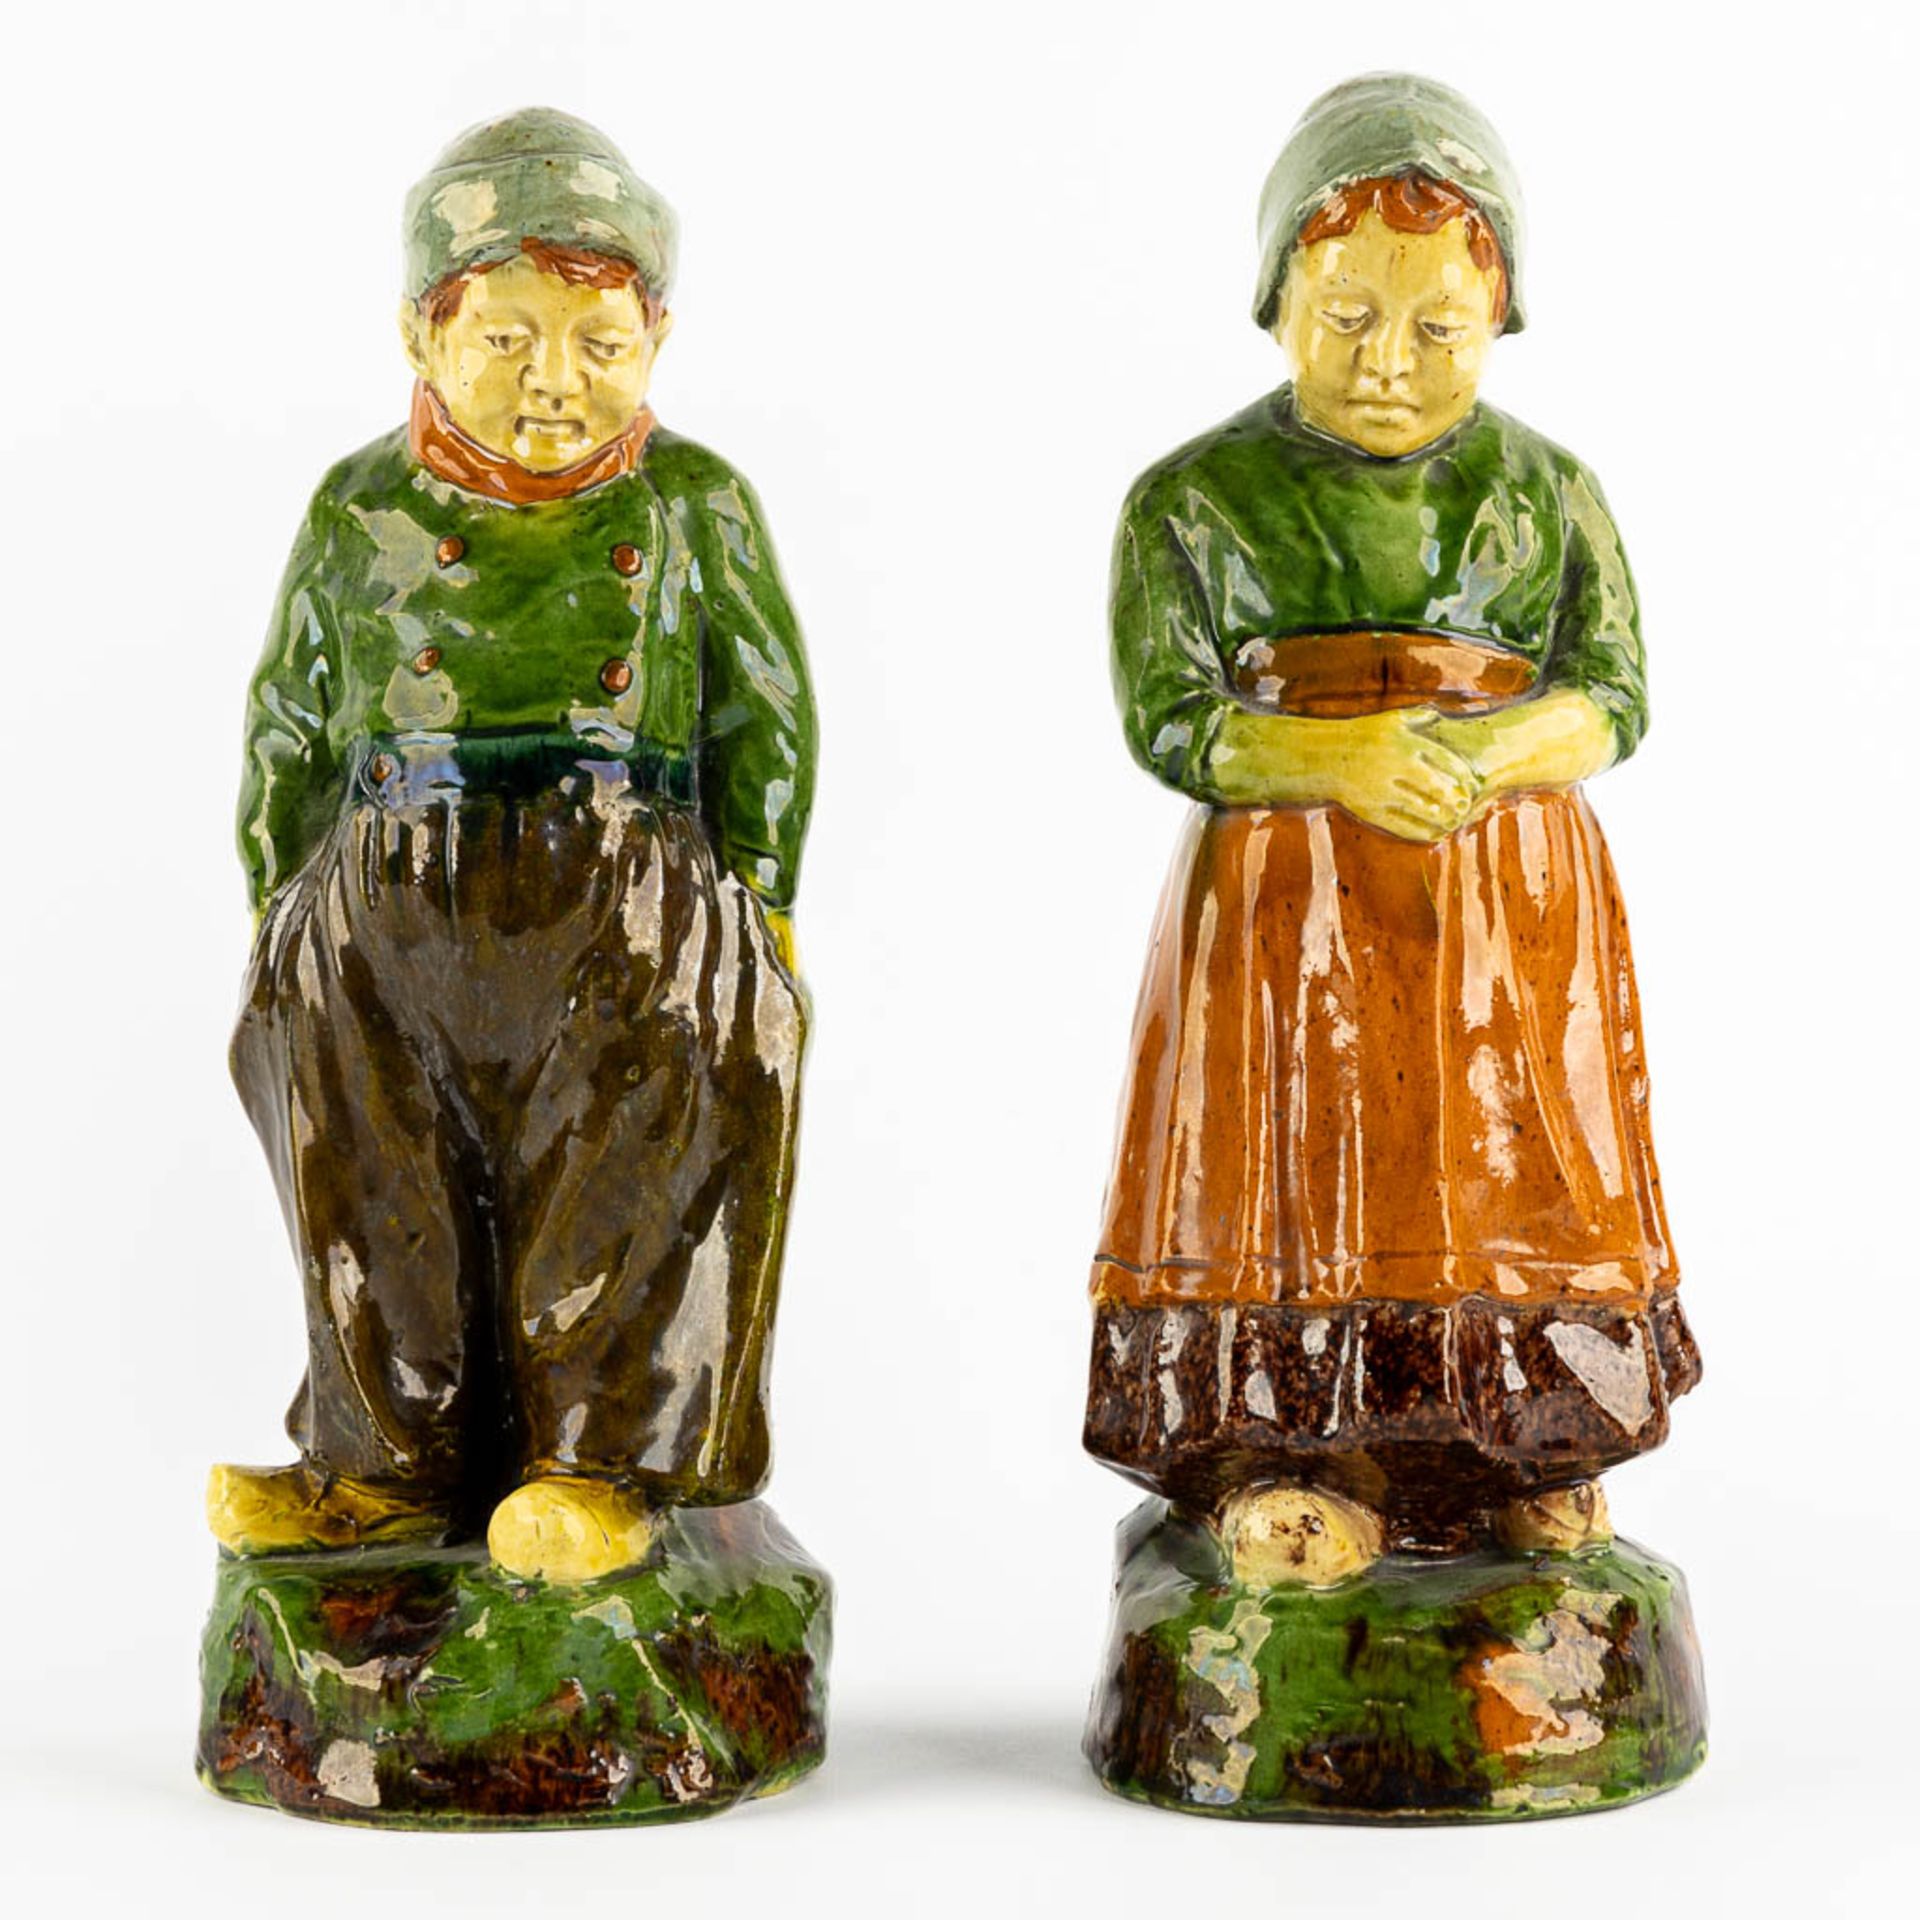 Figurine of a Man and Woman, Flemish Earthenware, possibly Caessens. Circa 1900. (H:32 x D:12 cm) - Image 3 of 9